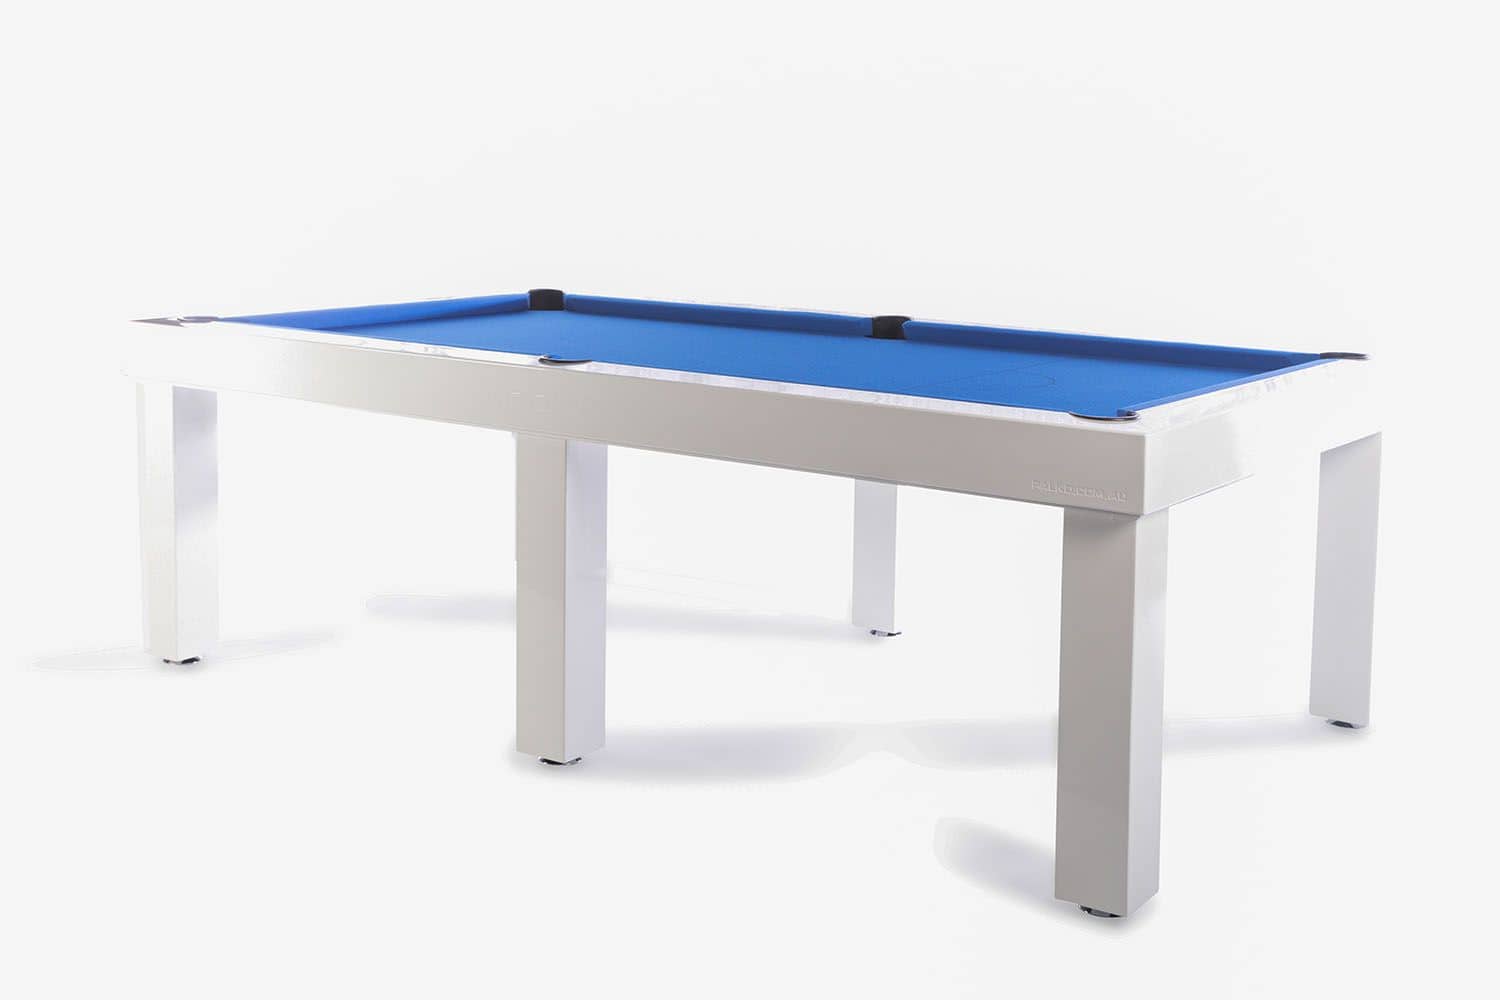 The Mood 8FT (Outdoor Pool Table)